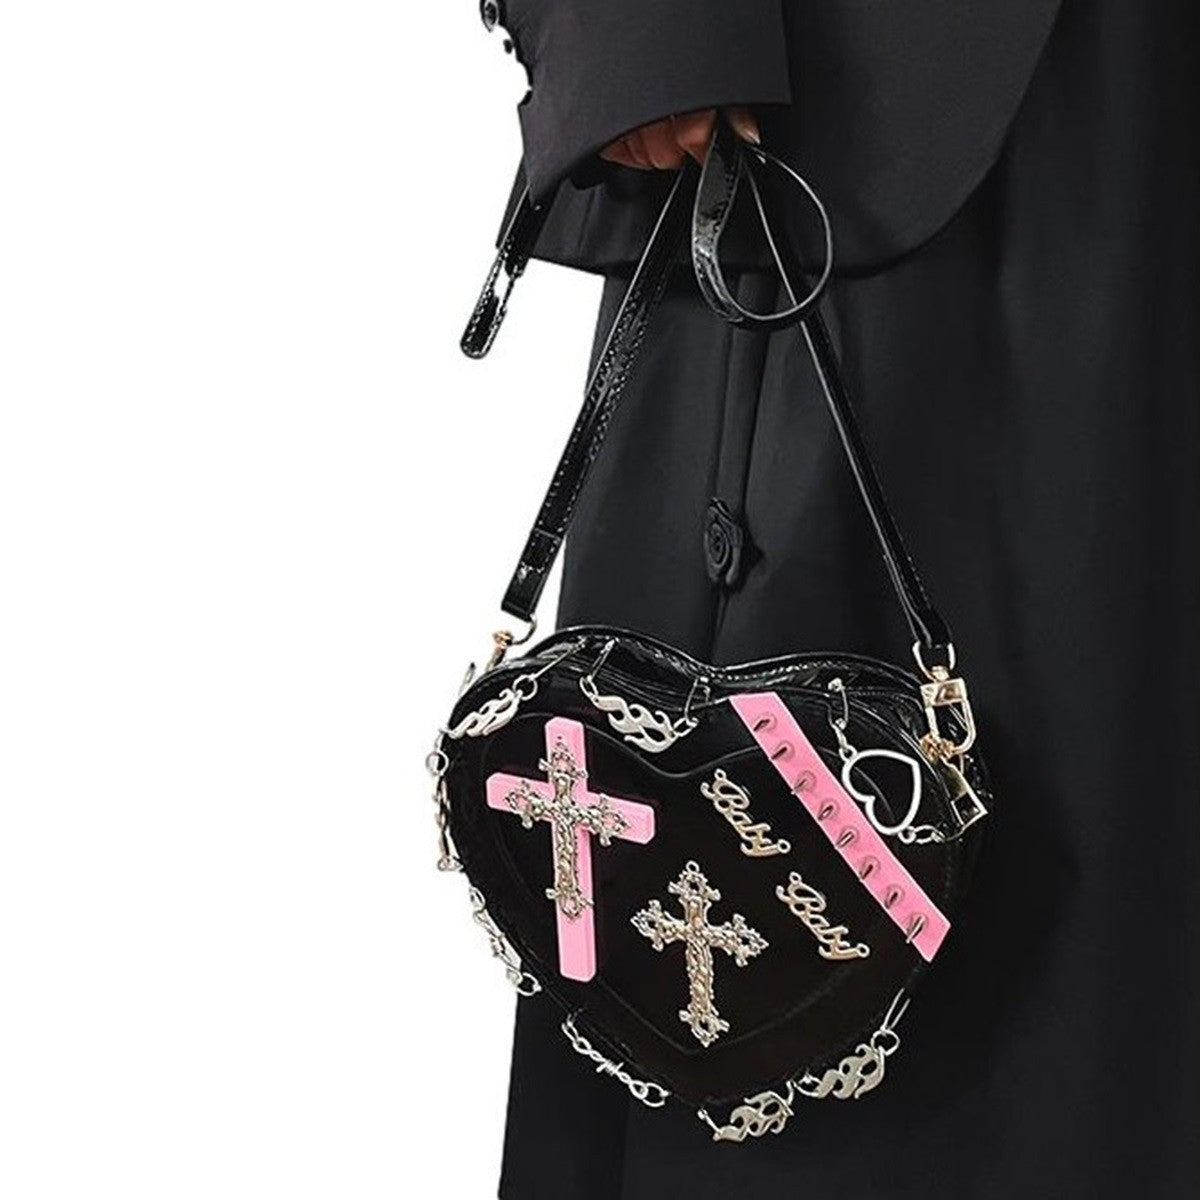 Ro Rox Heart Fire Barbed Wire Cross Studded Shoulder Bag